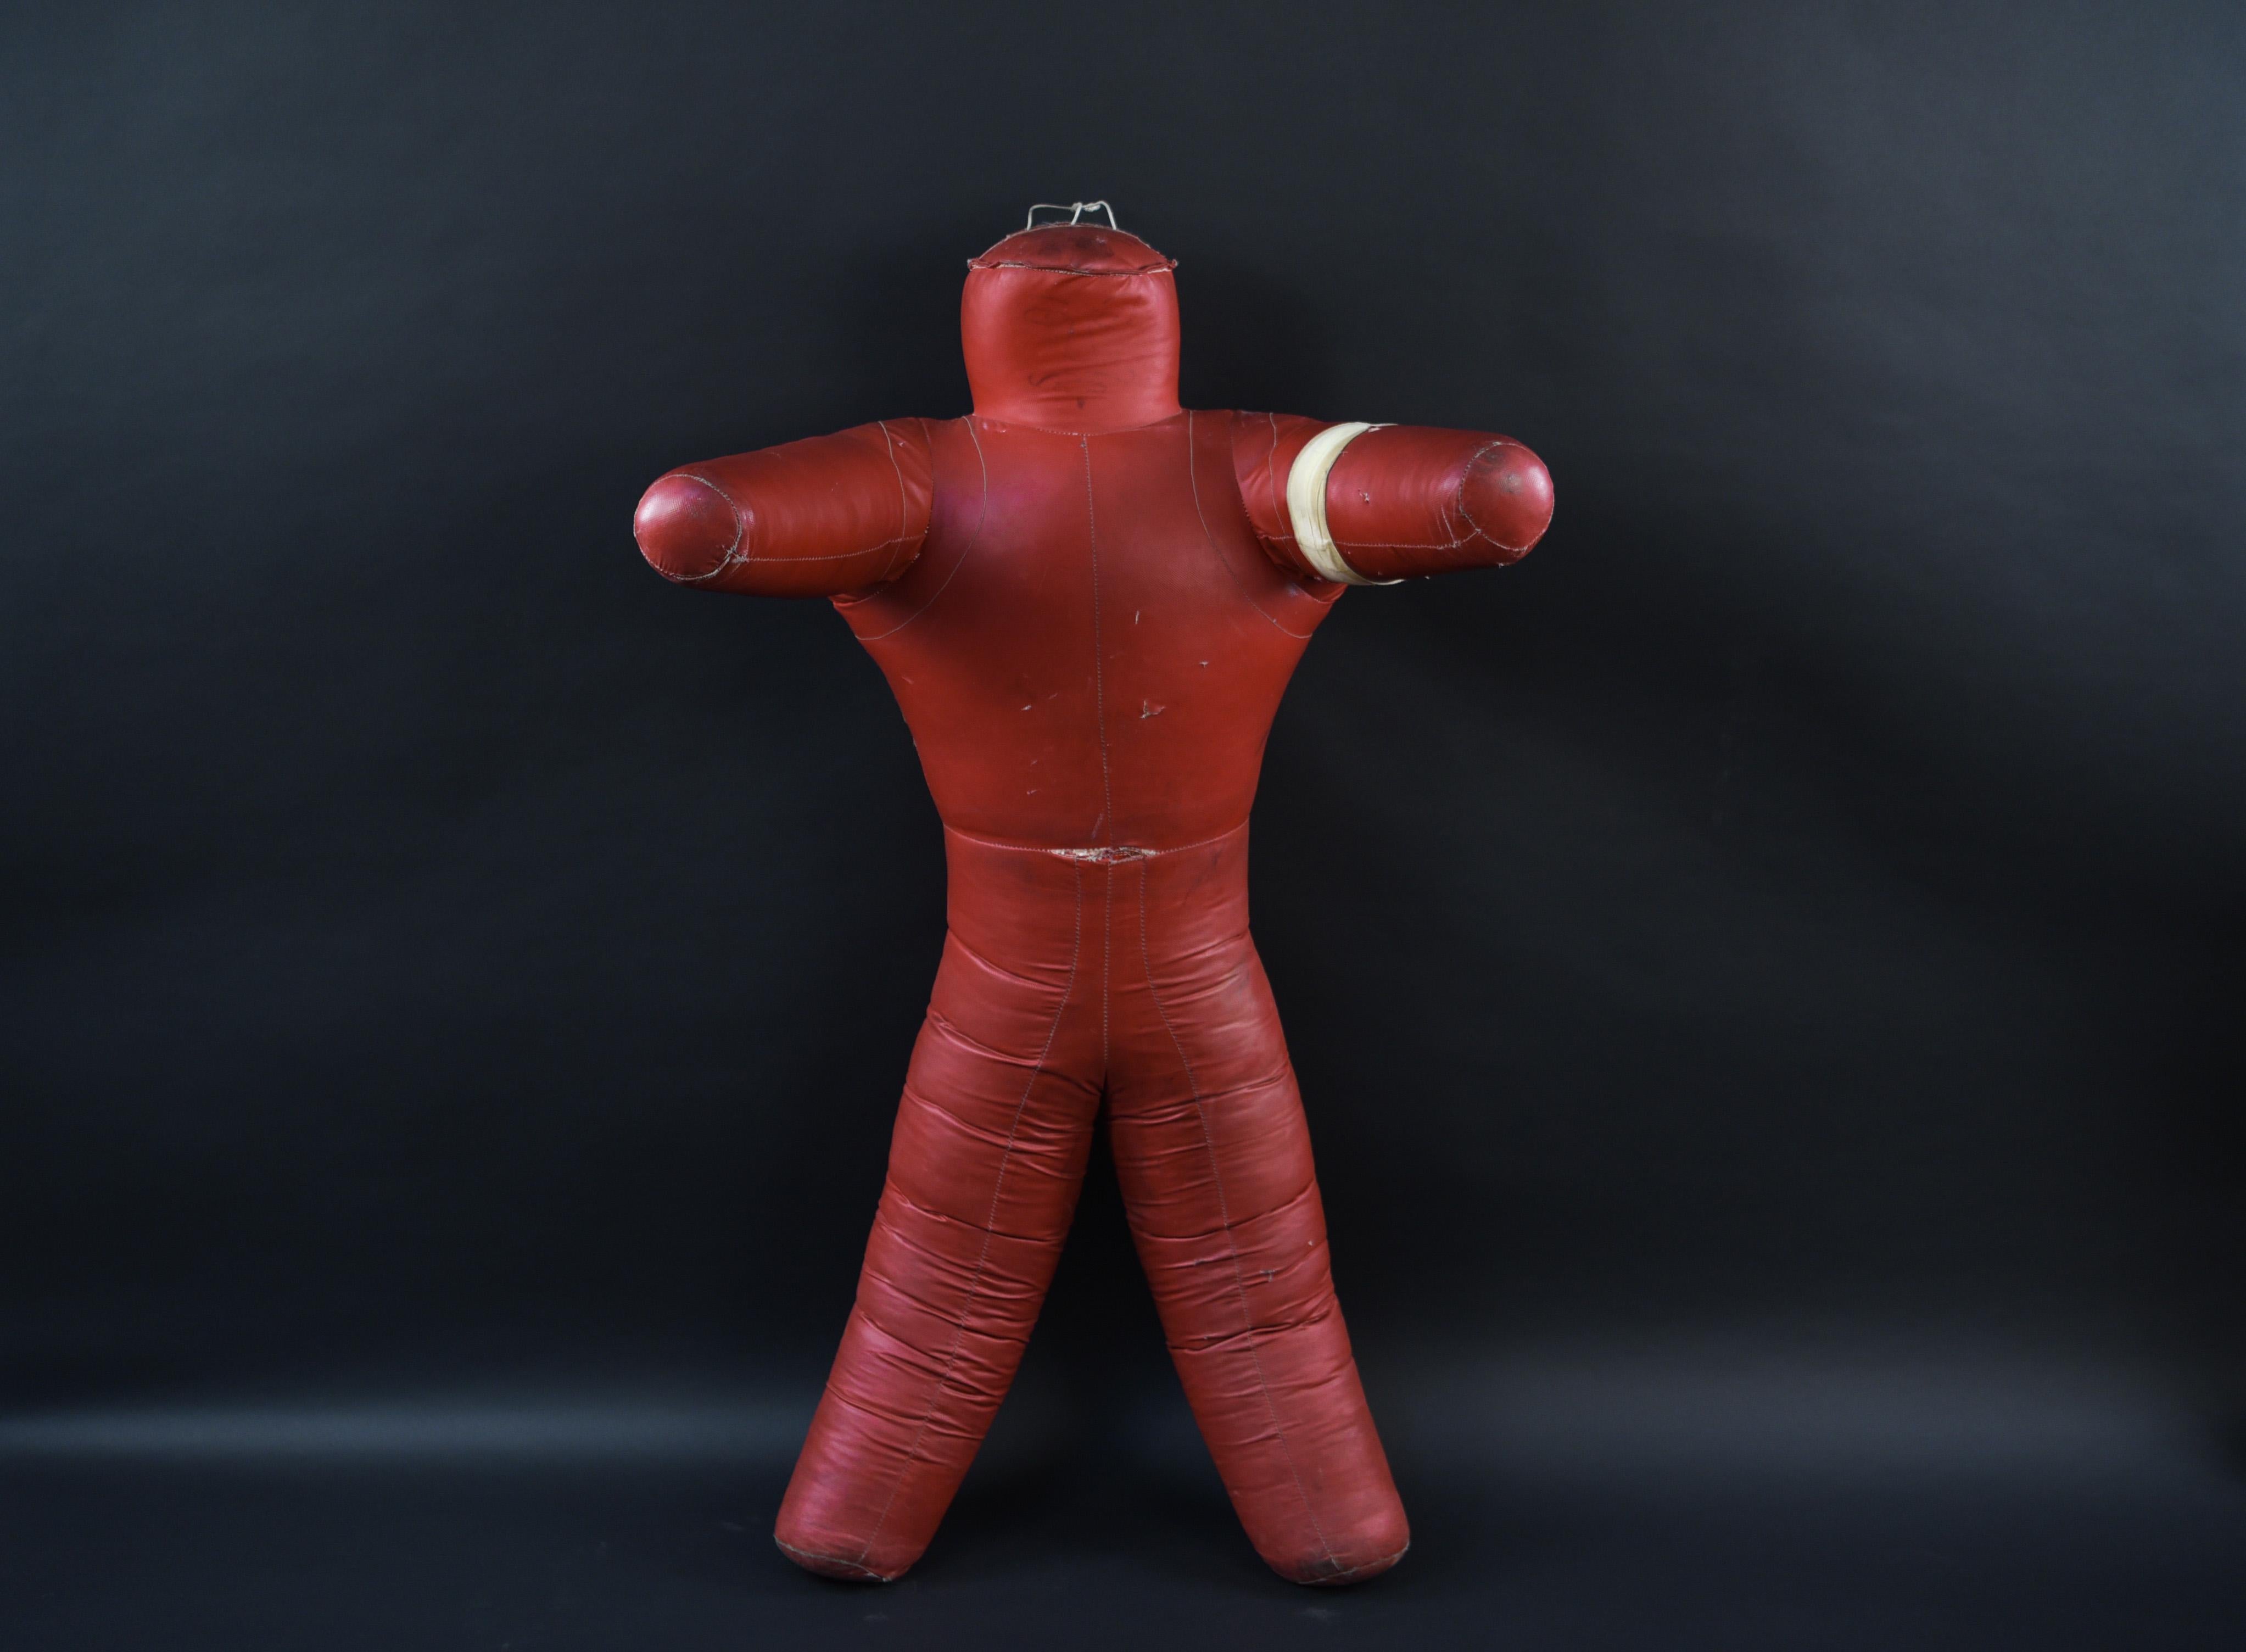 This vintage wrestling dummy or throwing dummy is in a striking red leather. This fun piece would bring an air of humor and lightheartedness to any space.